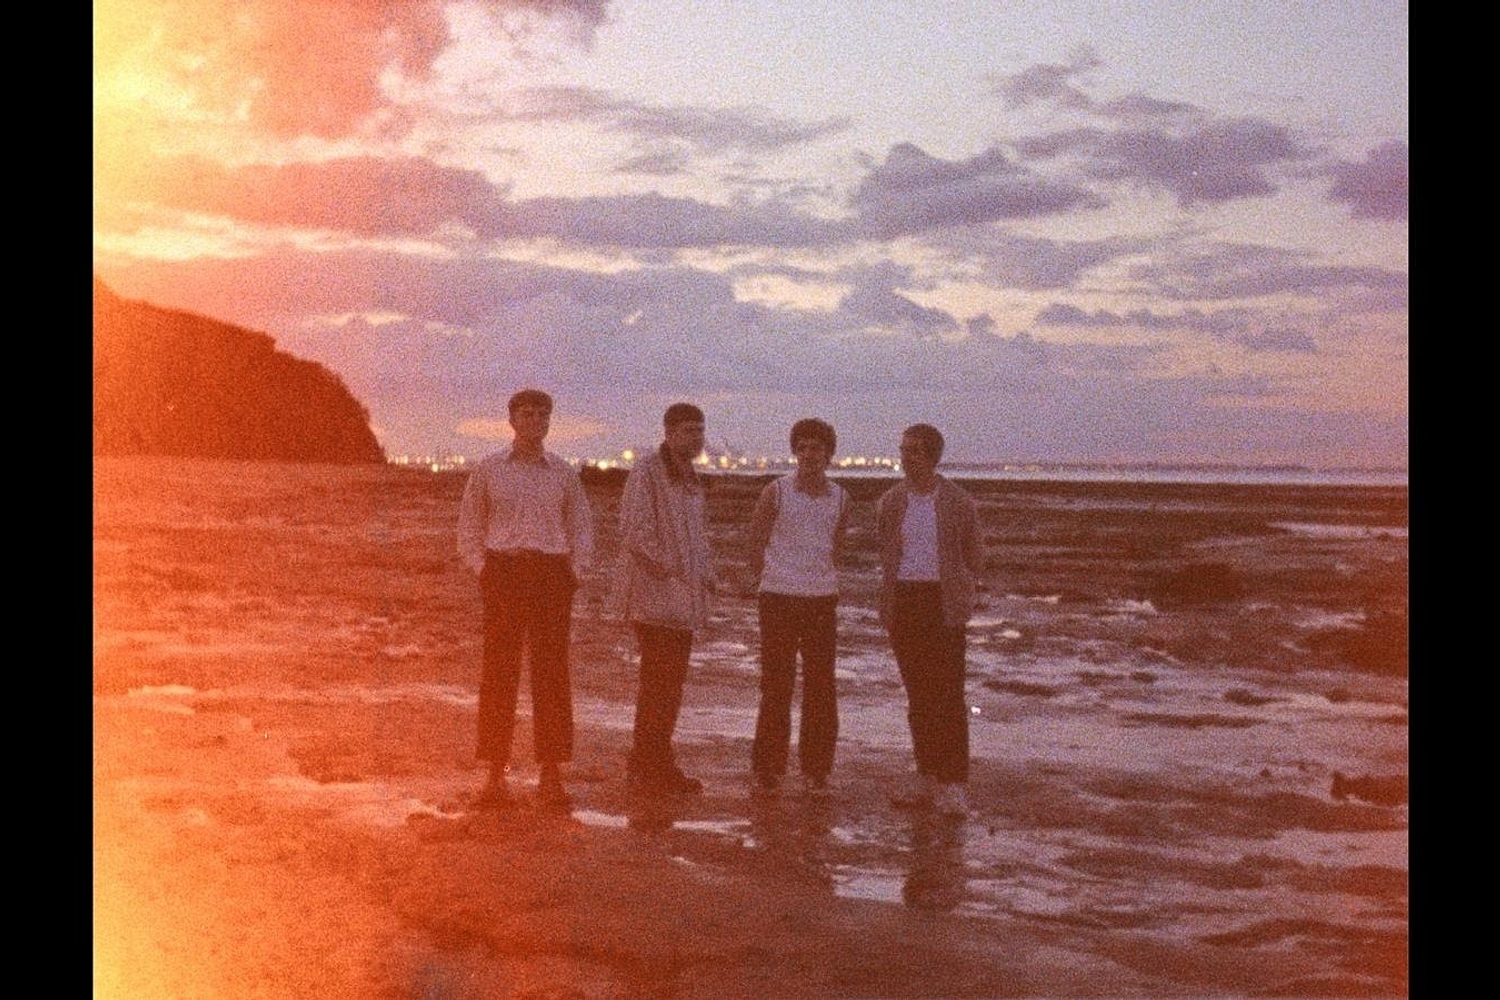 Hotel Lux share ‘Ballad of You & I’